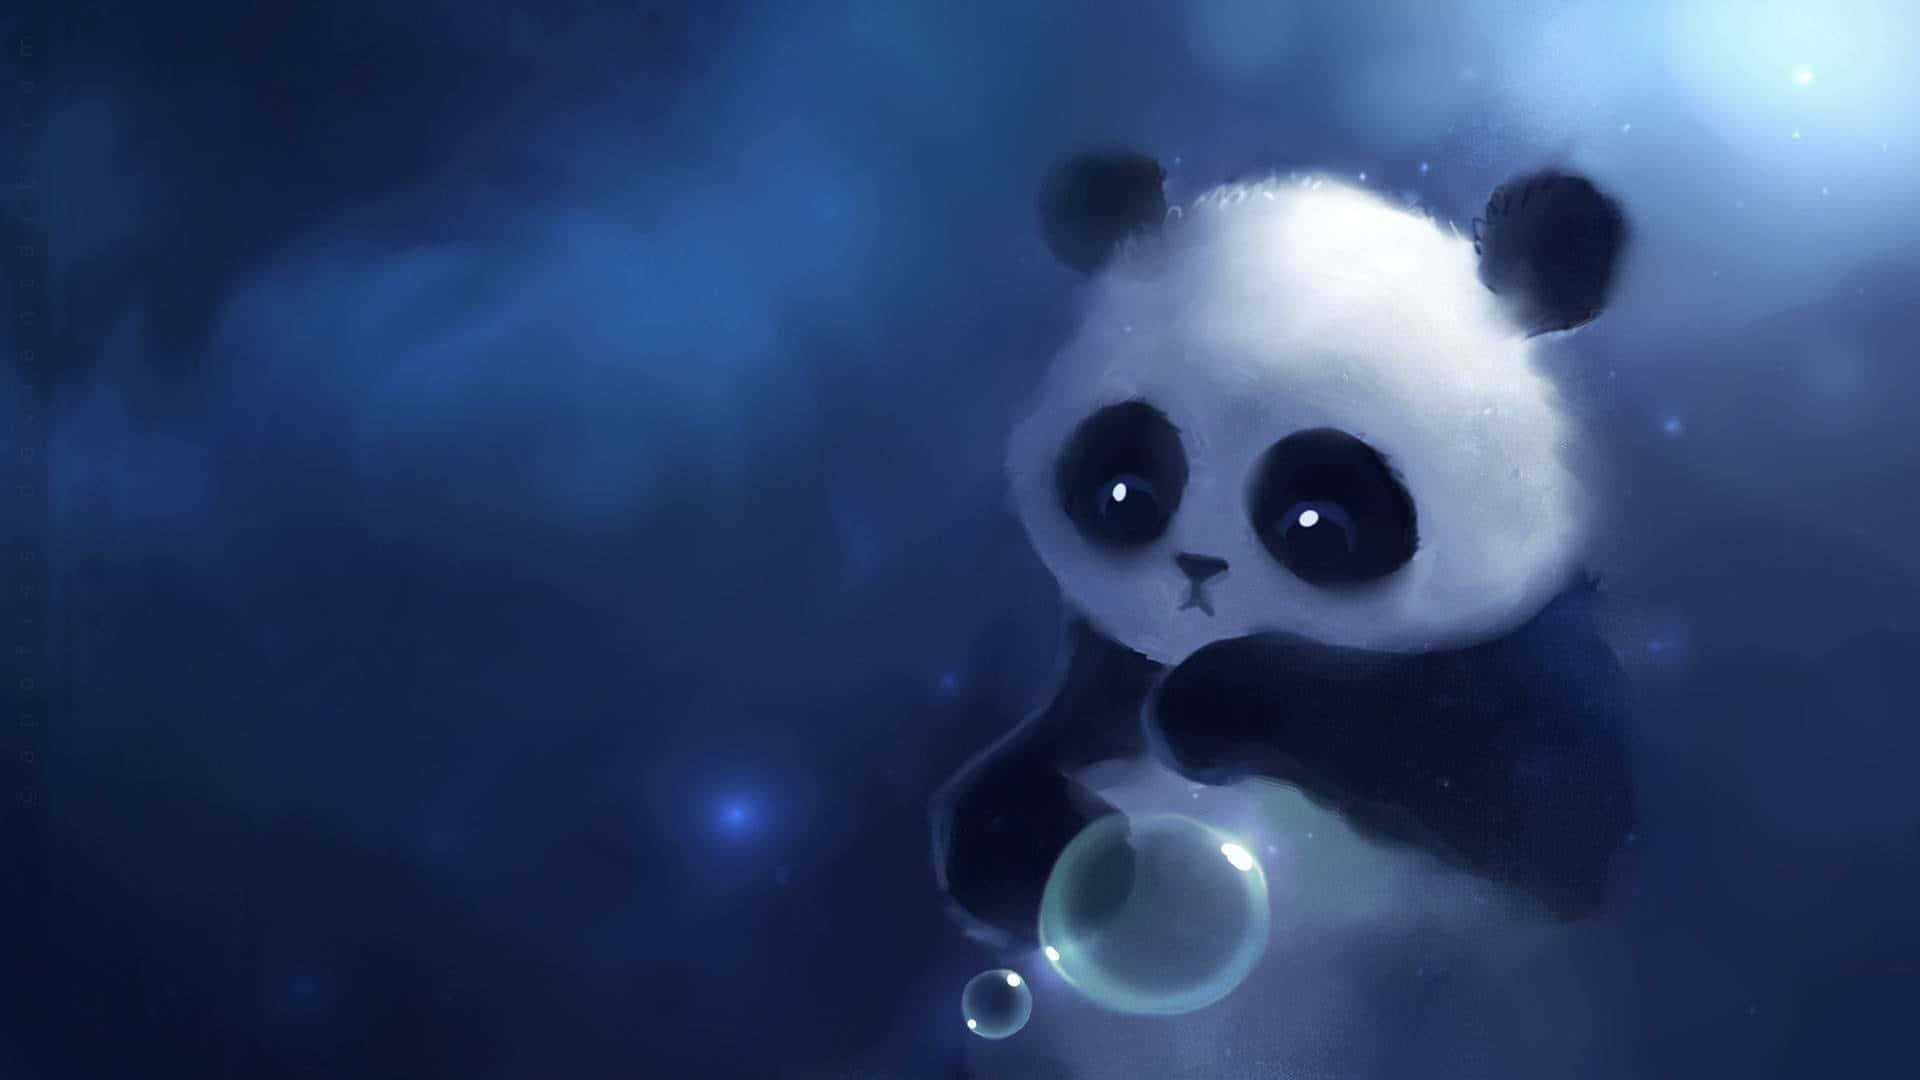 A cute dark blue cartoon character with a cheerful expression. Wallpaper